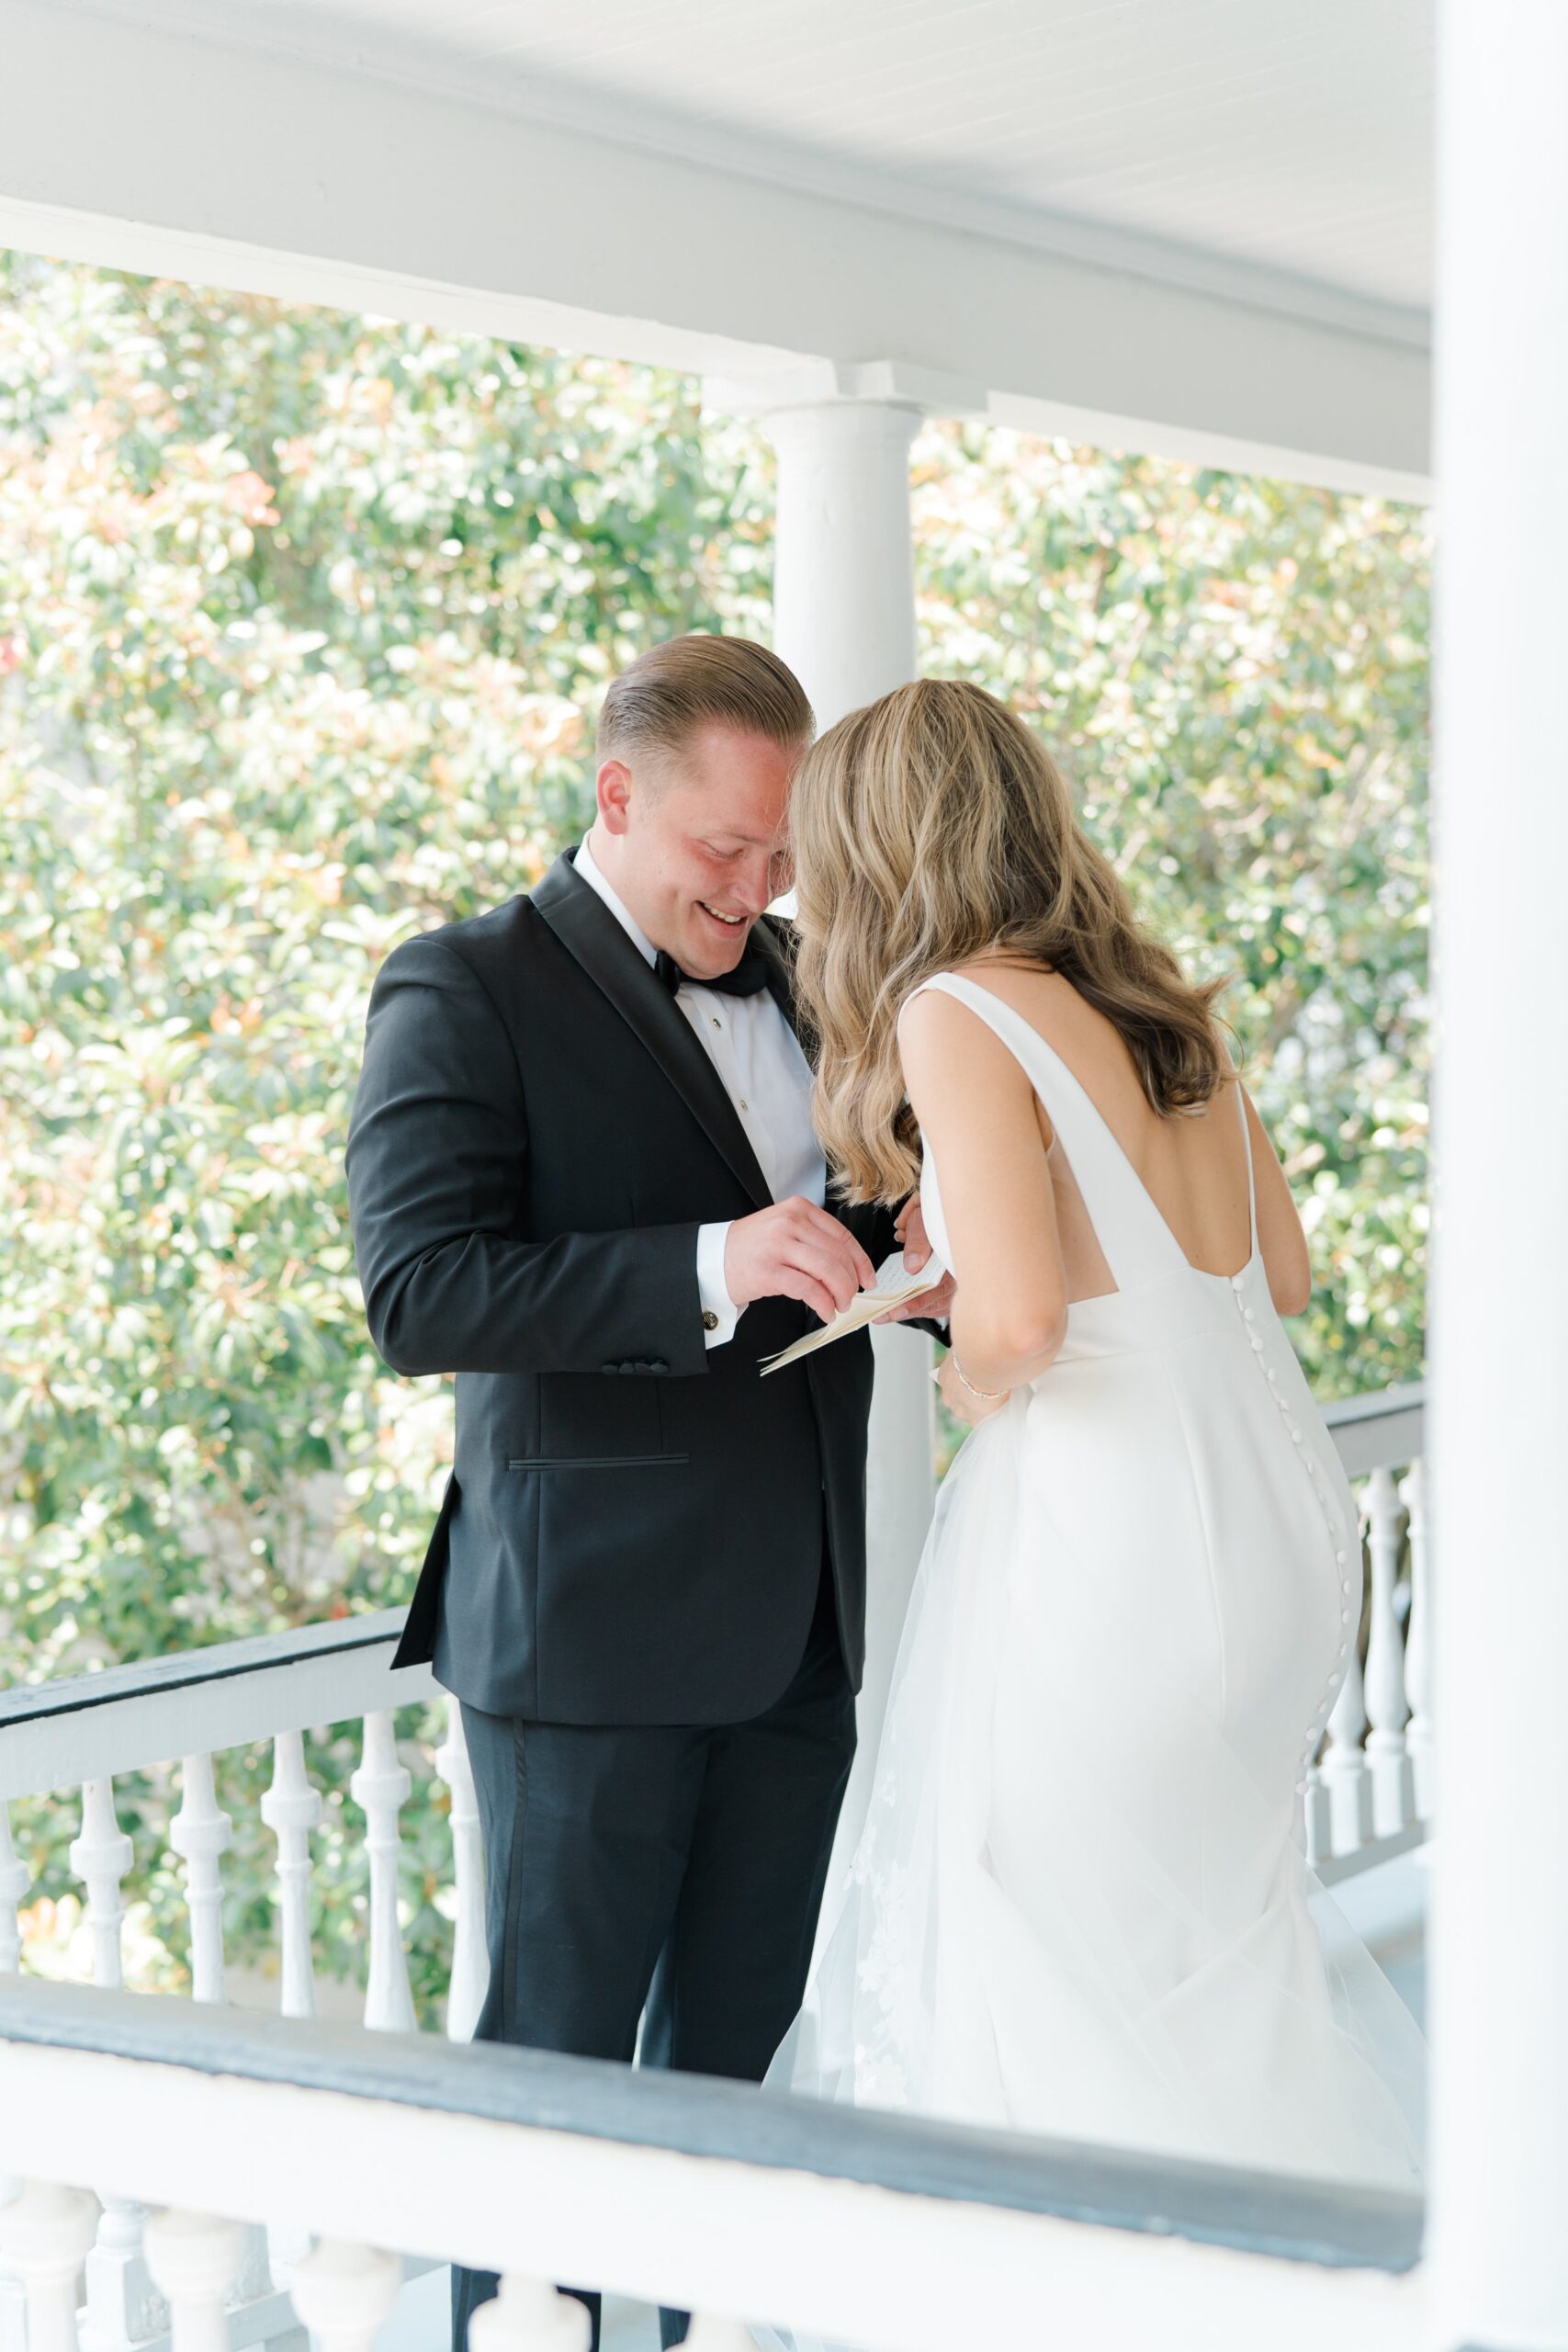 personal vows between bride and groom on morning of wedding.